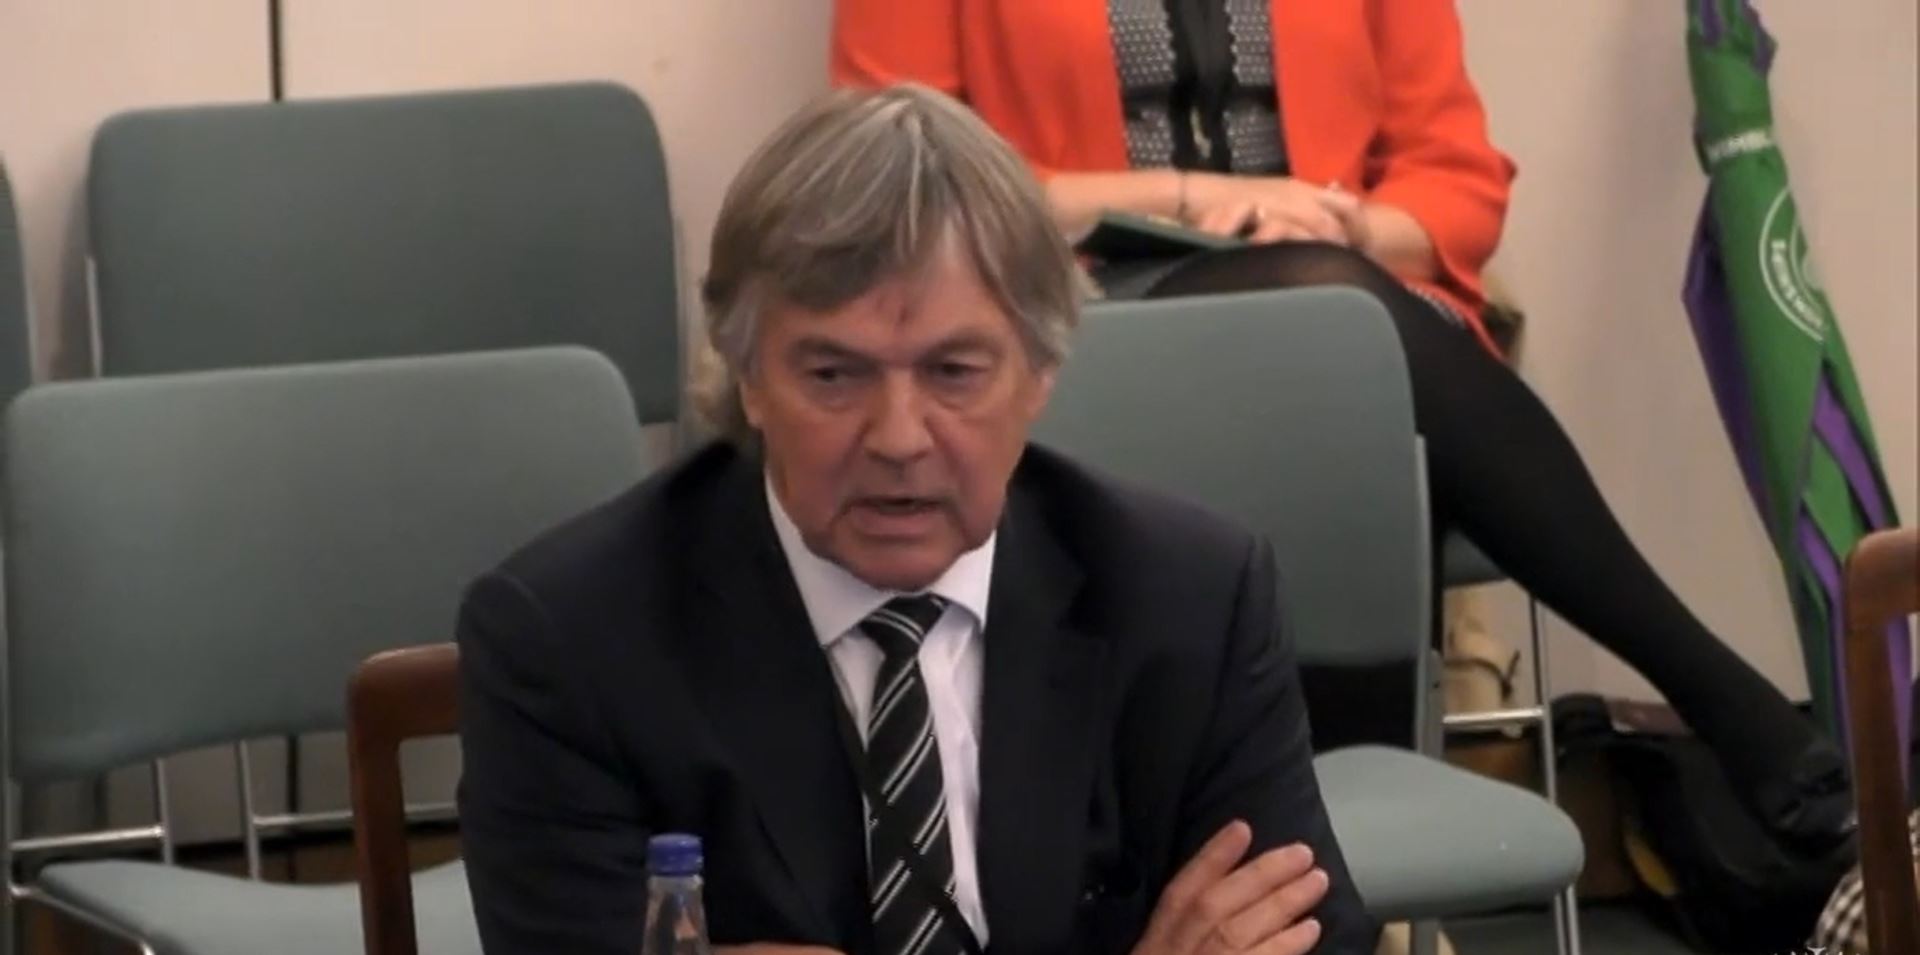 President of the RSM Professor Roger Kirby giving evidence at parliament